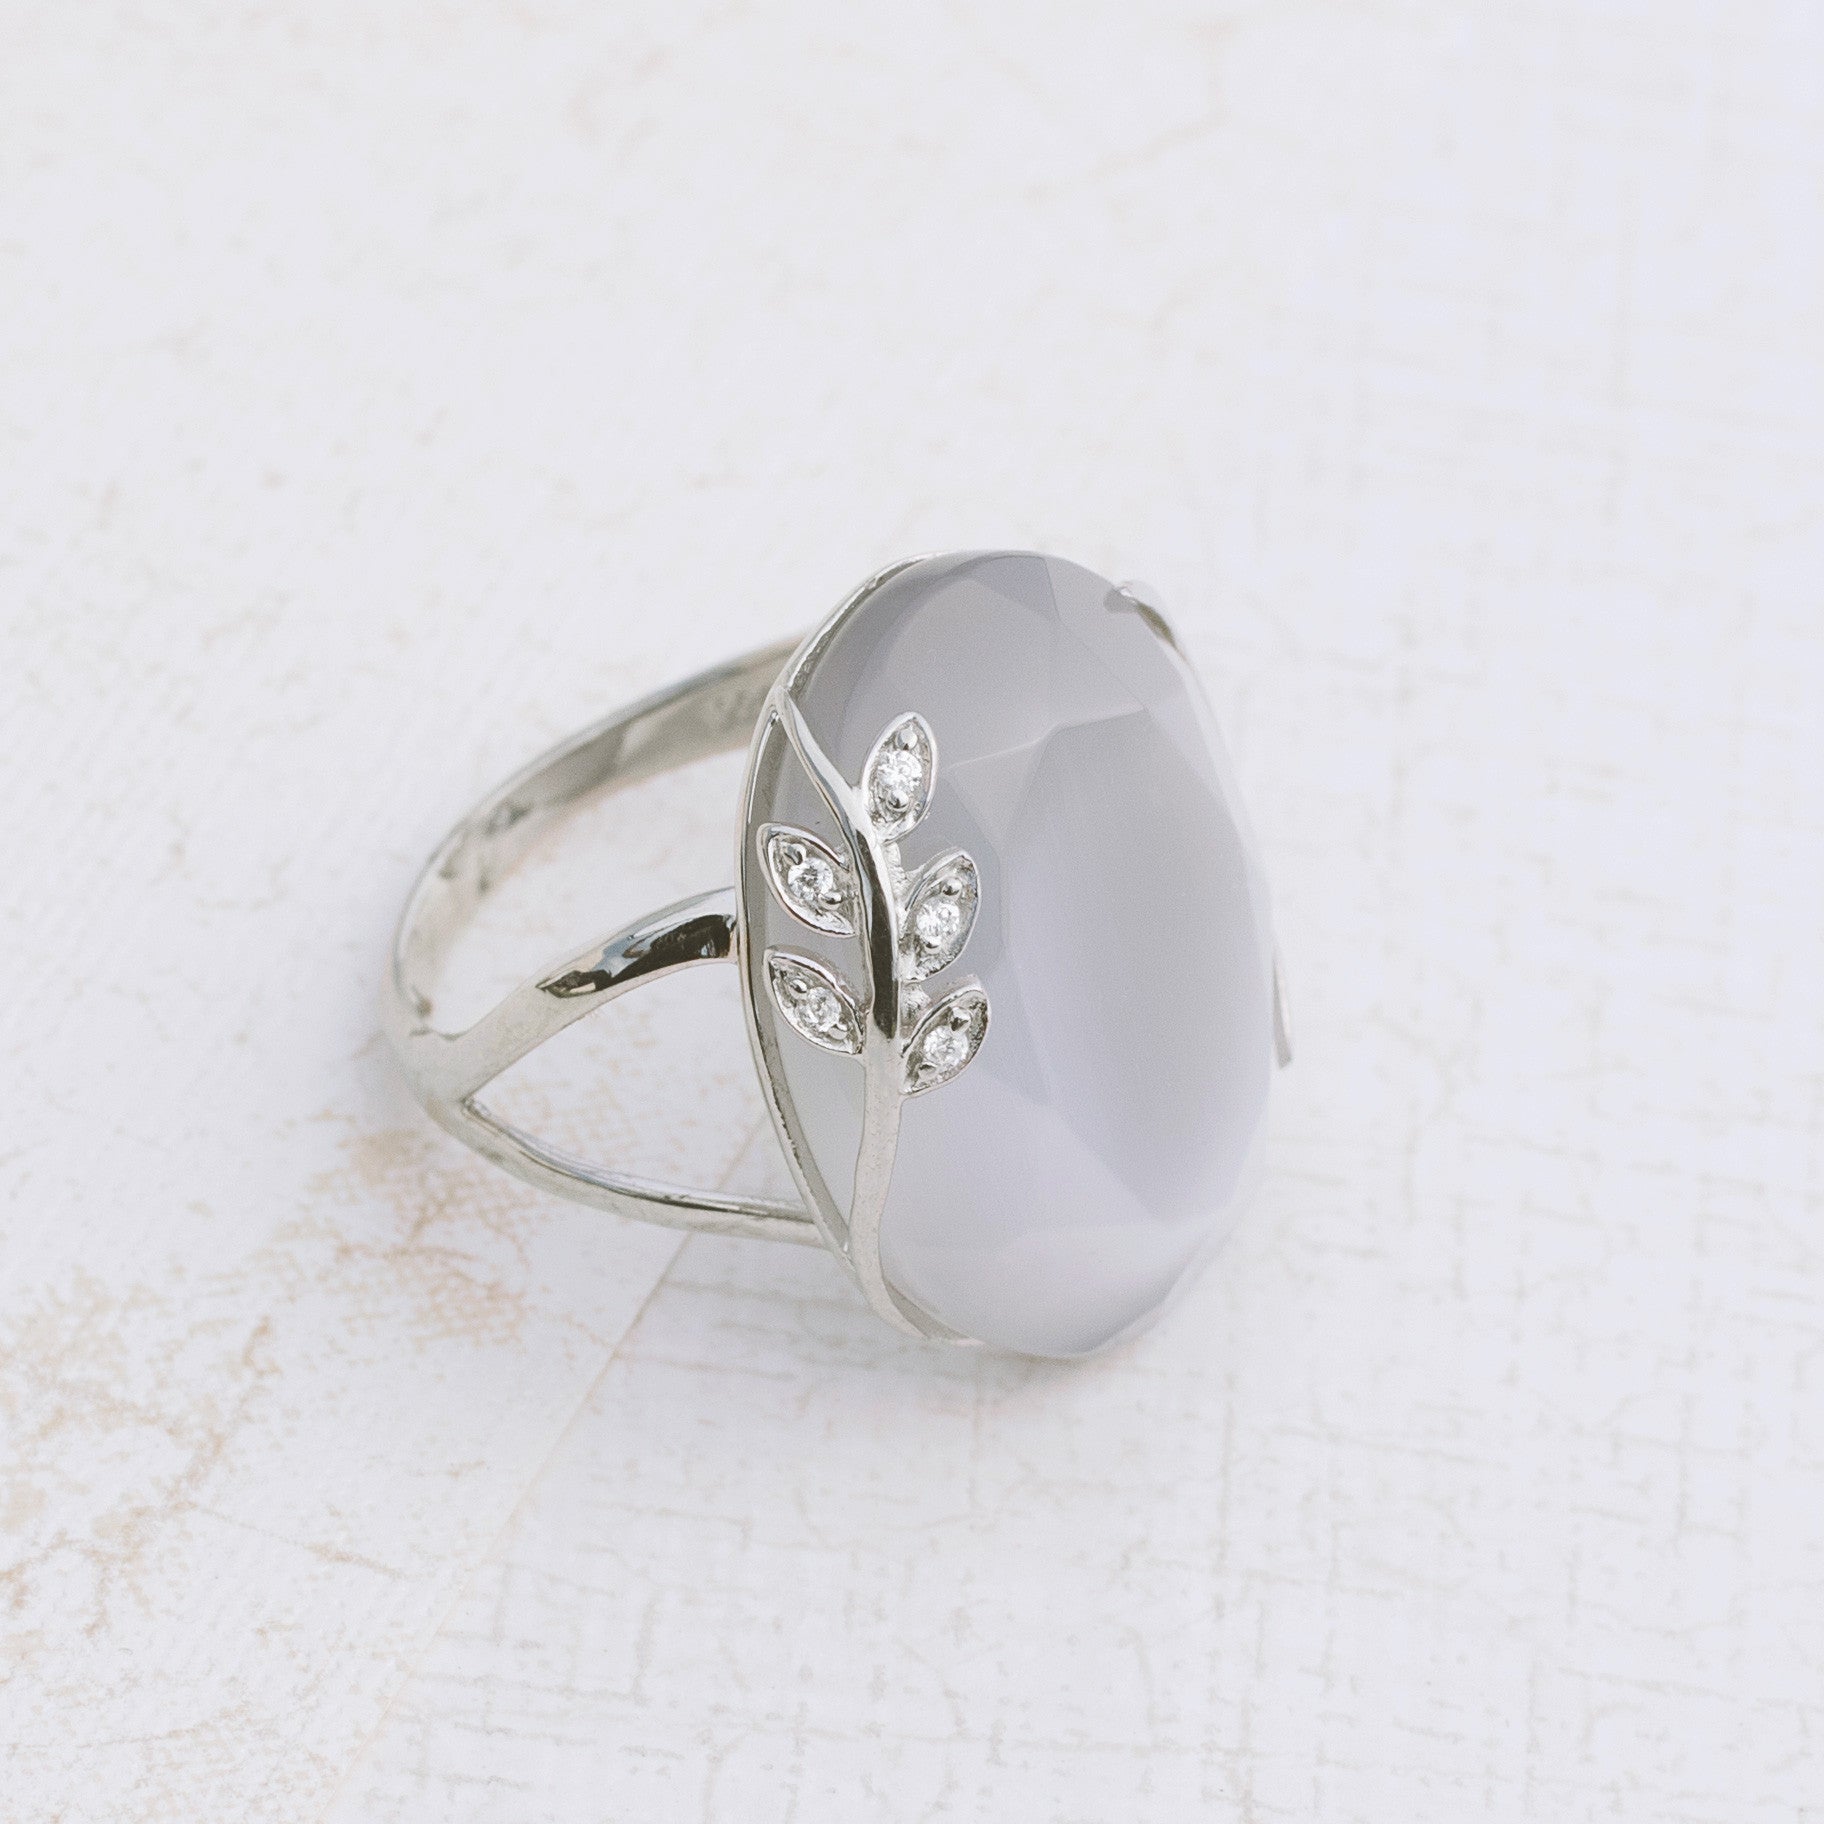 Smoke Signals Sterling Silver Ring - pipercleo.com